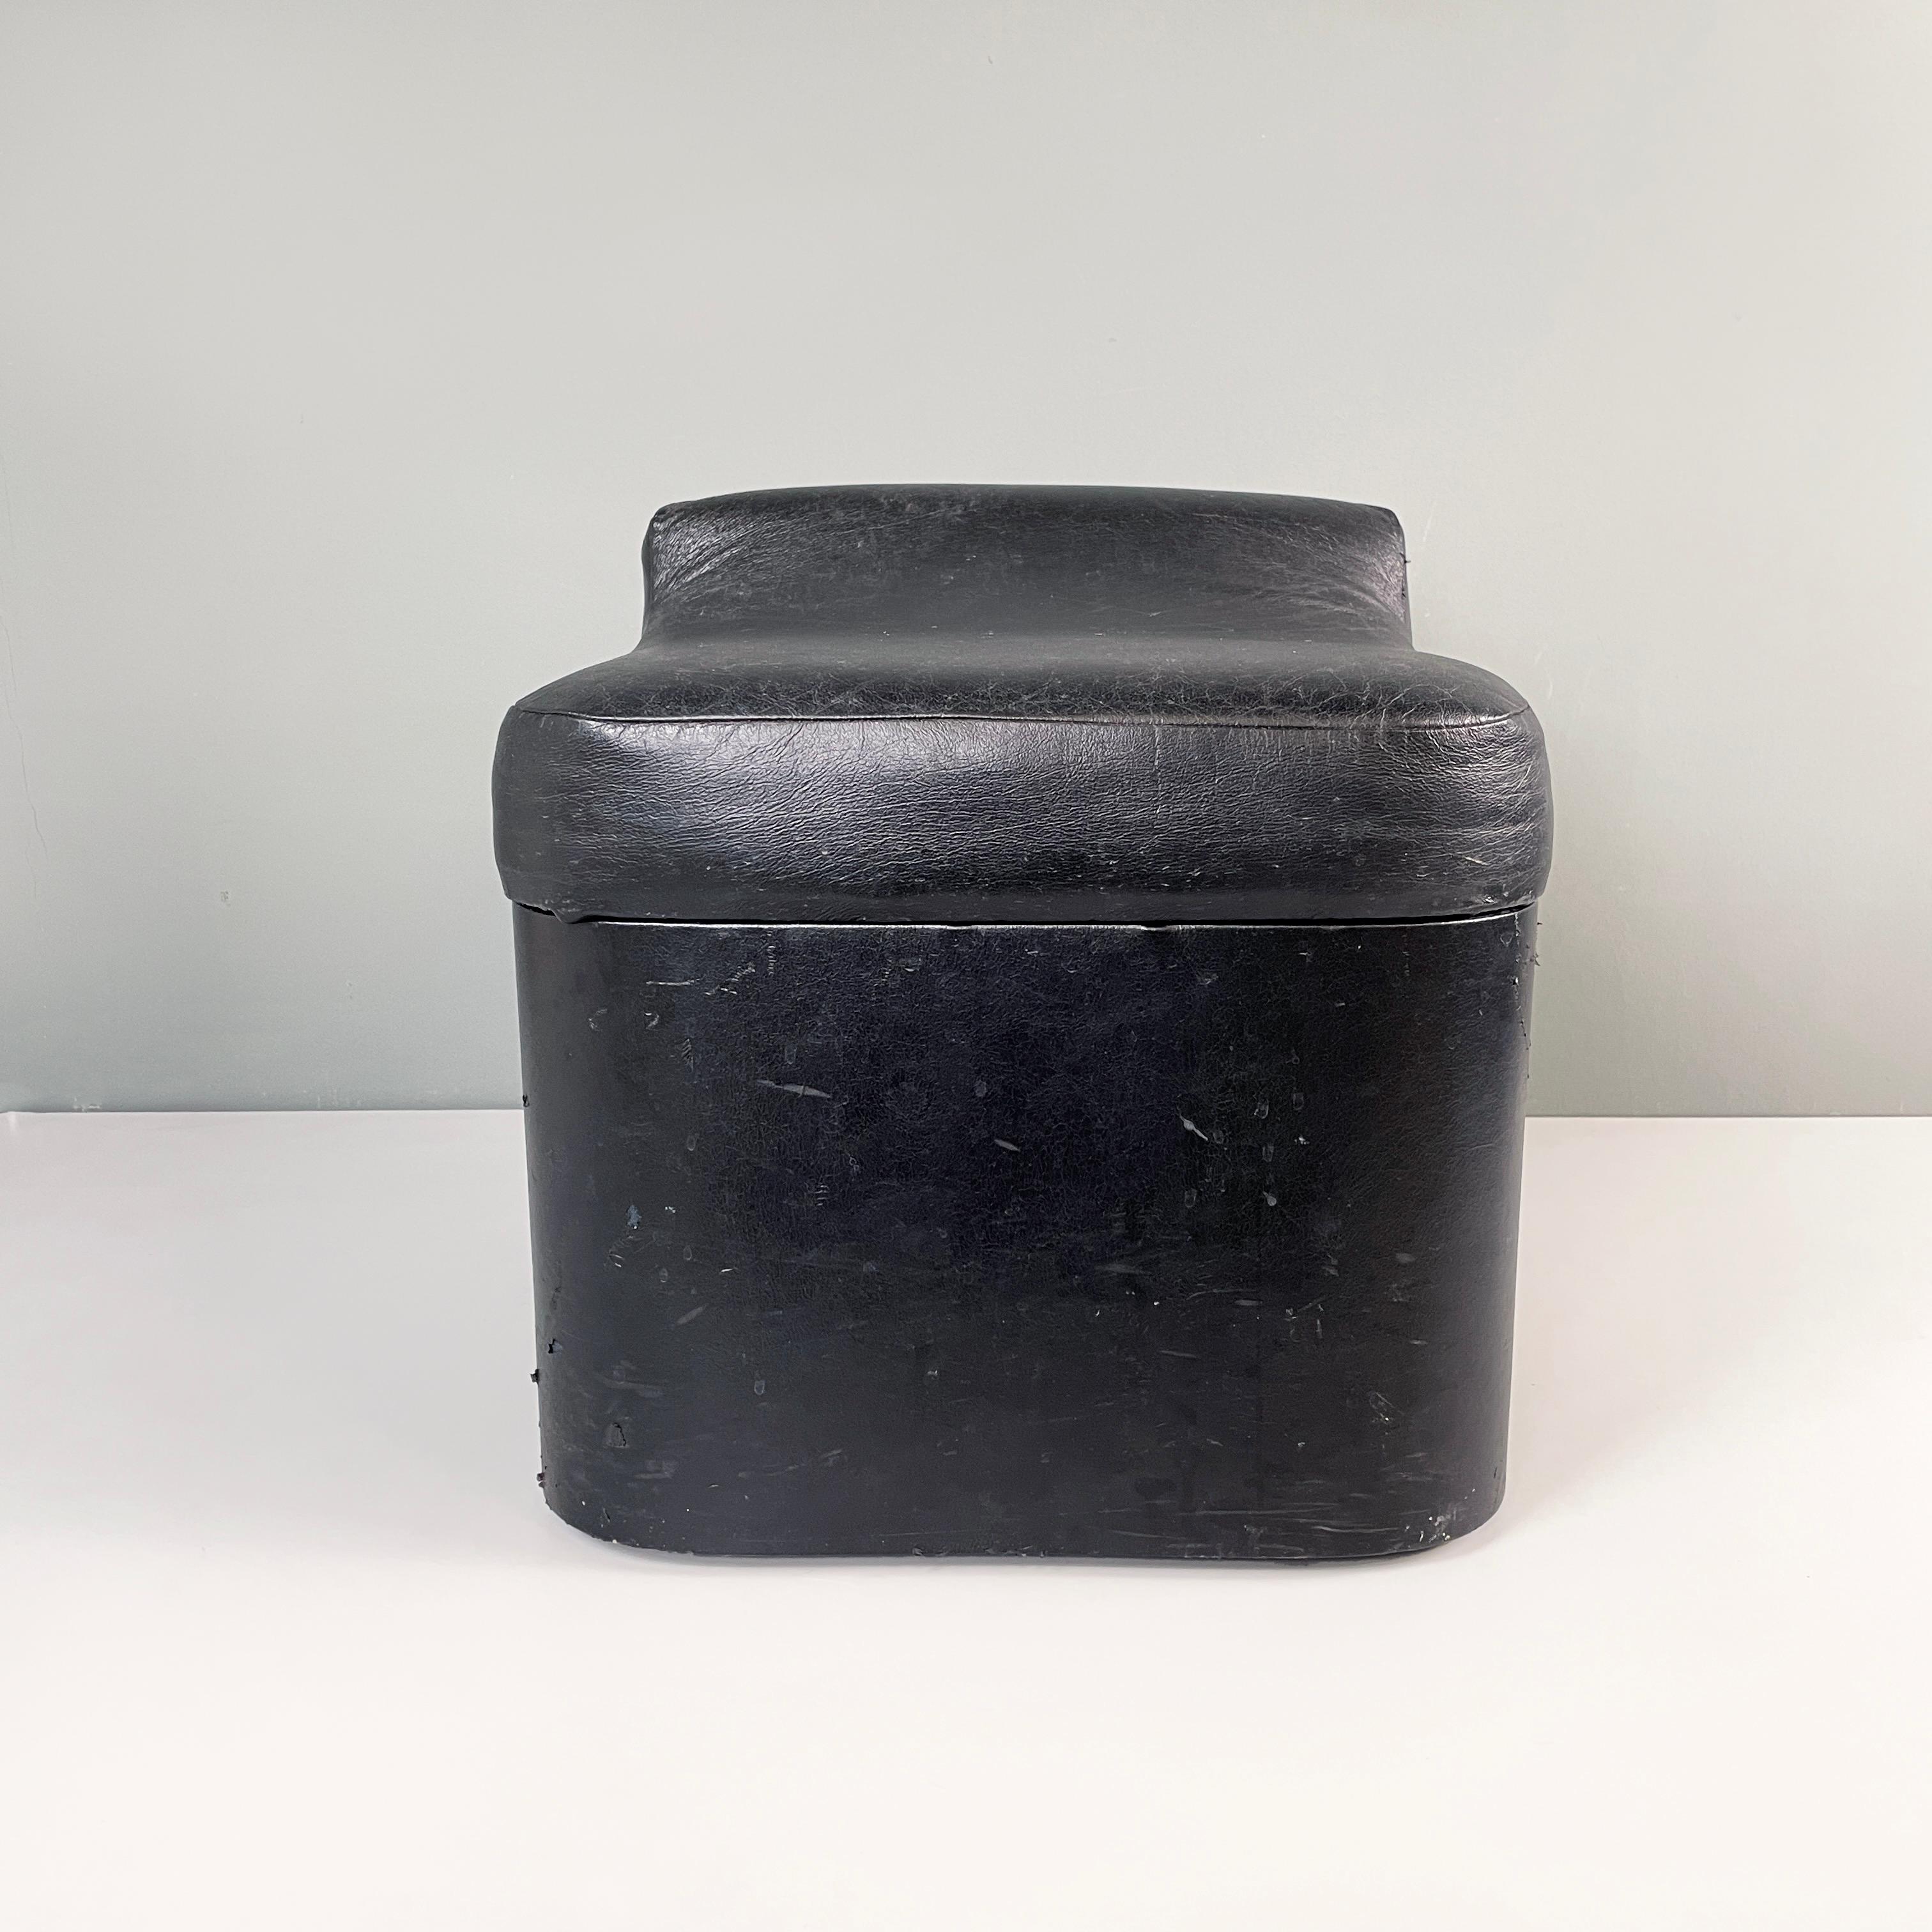 Italian modern Squared Stool in black faux leather with wheels, 1980s
Square base pouf in black faux leather. The stool has a slight rise on the back. Wheels at the base, this makes it easy to transport from room to room.
1980 approx.
Vintage